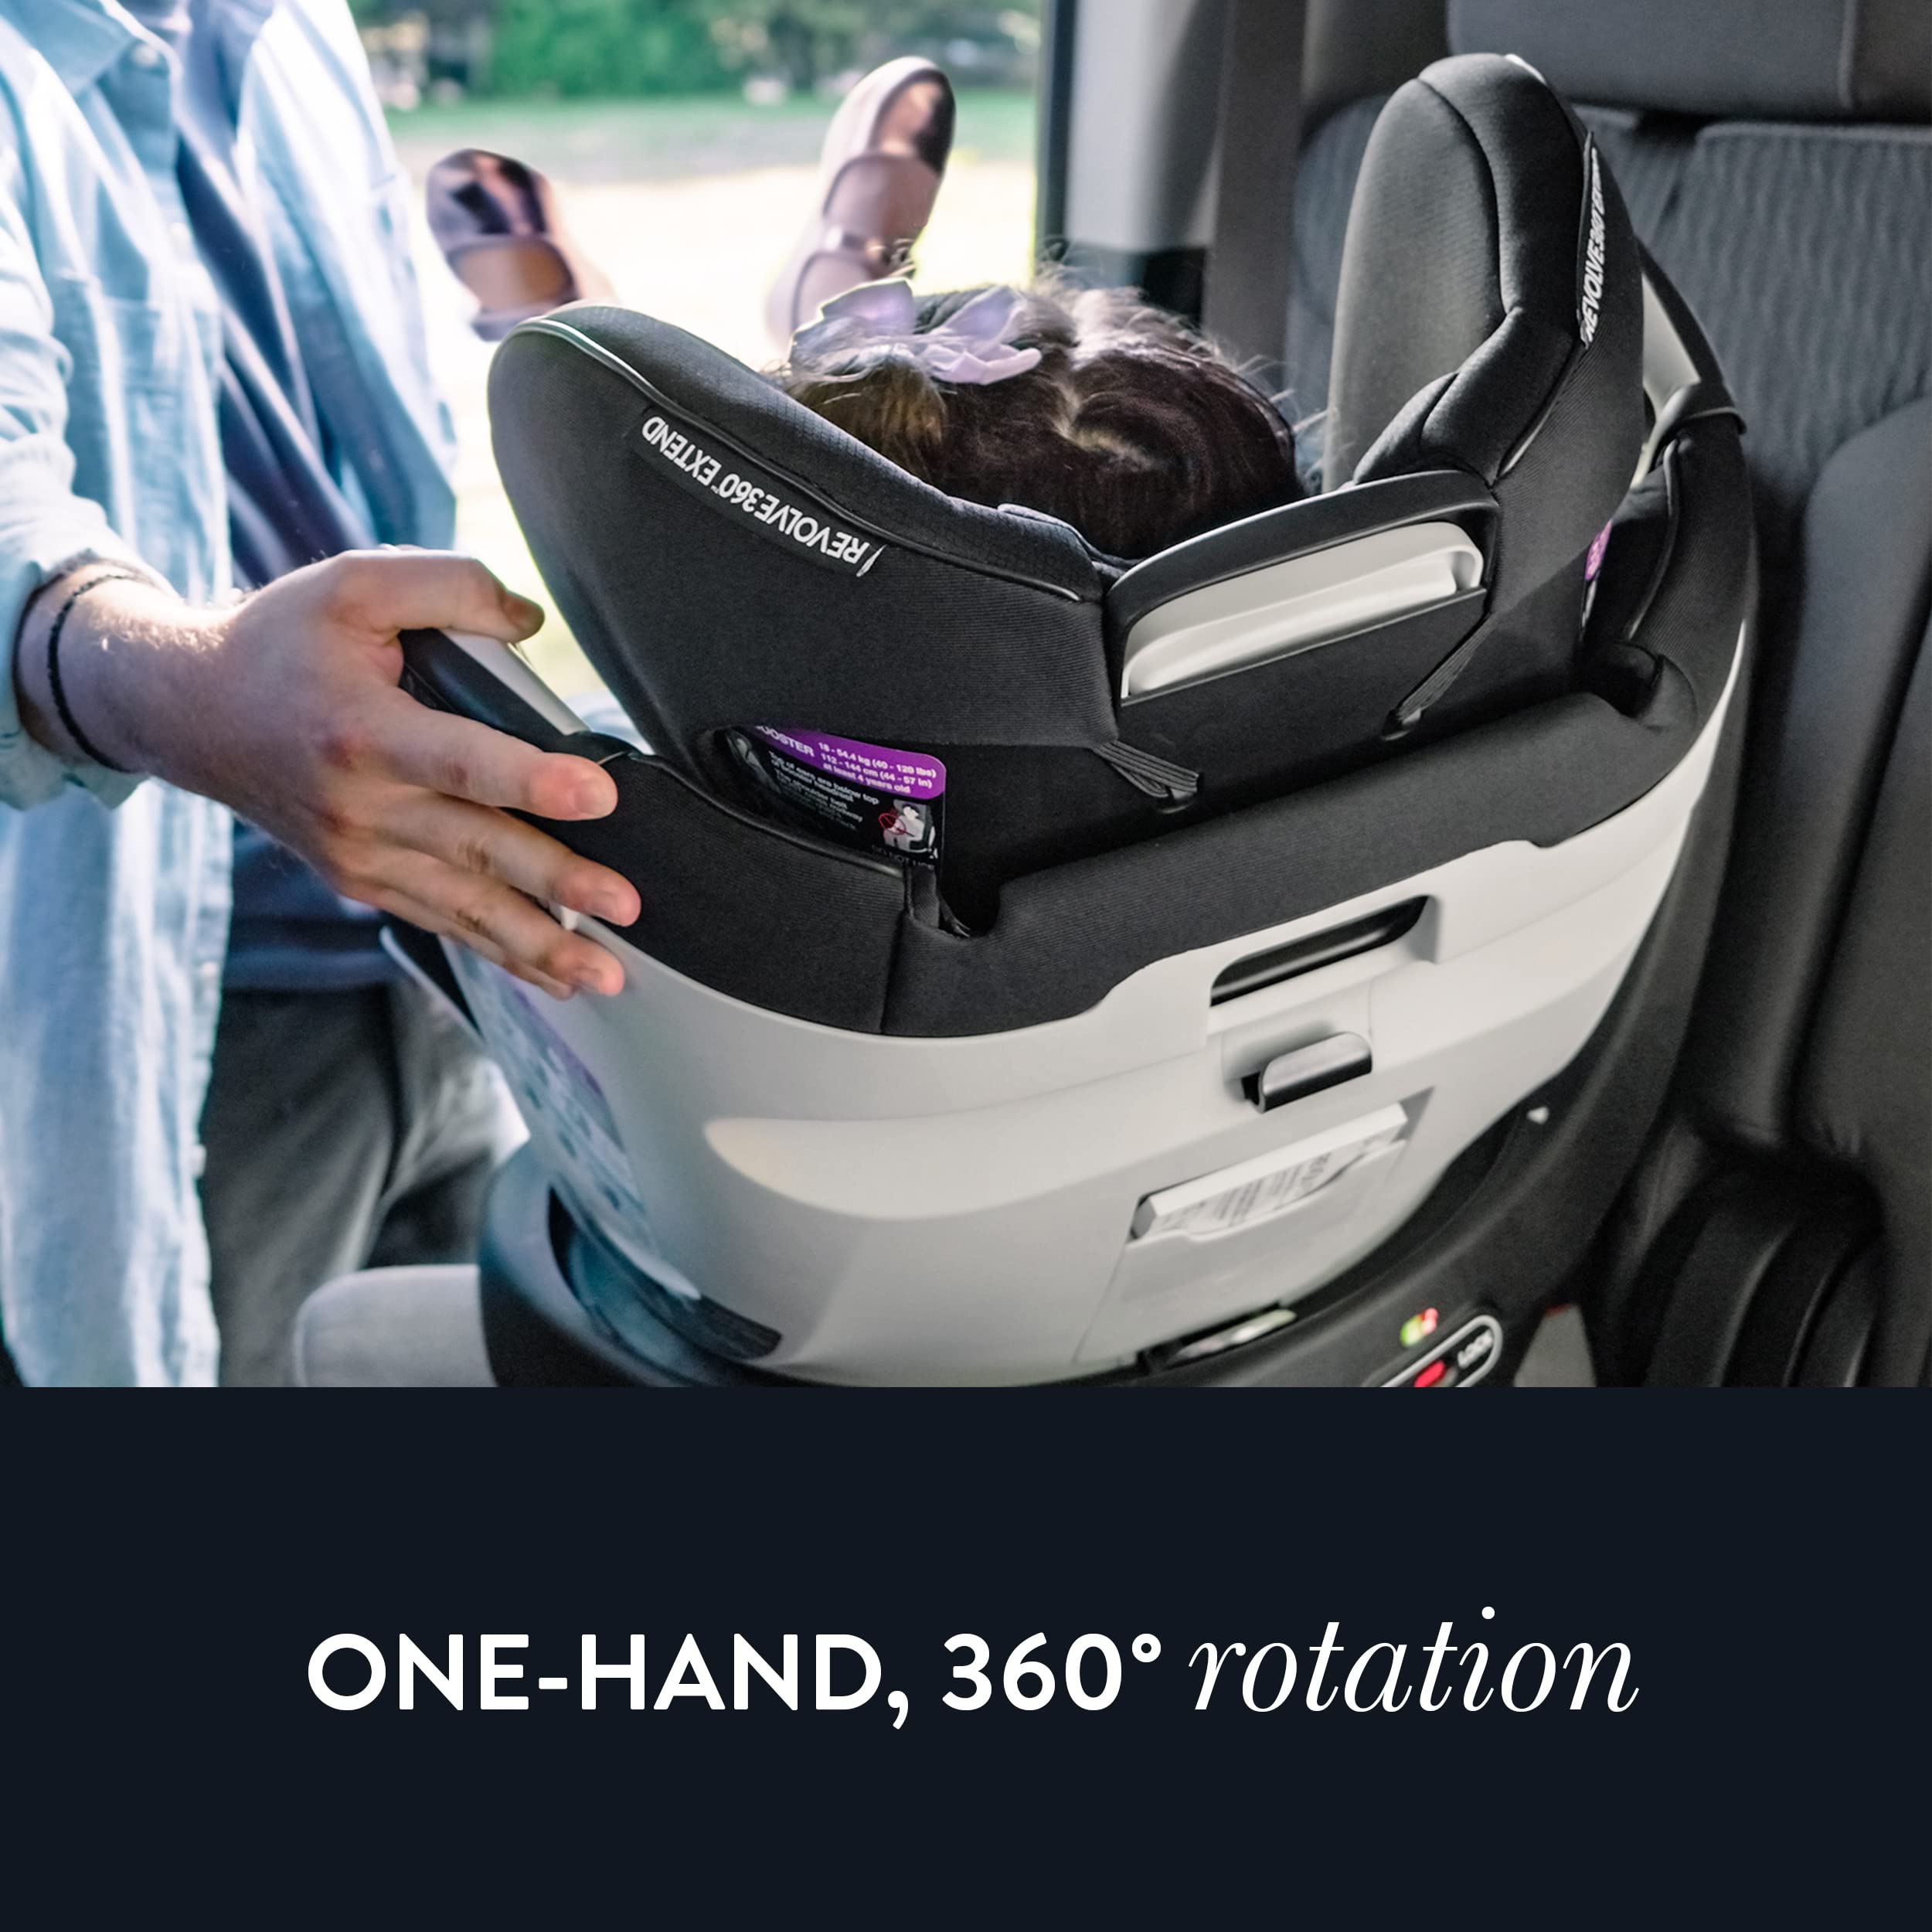 Evenflo Gold Revolve360 Extend All-in-One Rotational Car Seat with SensorSafe (Onyx Black)